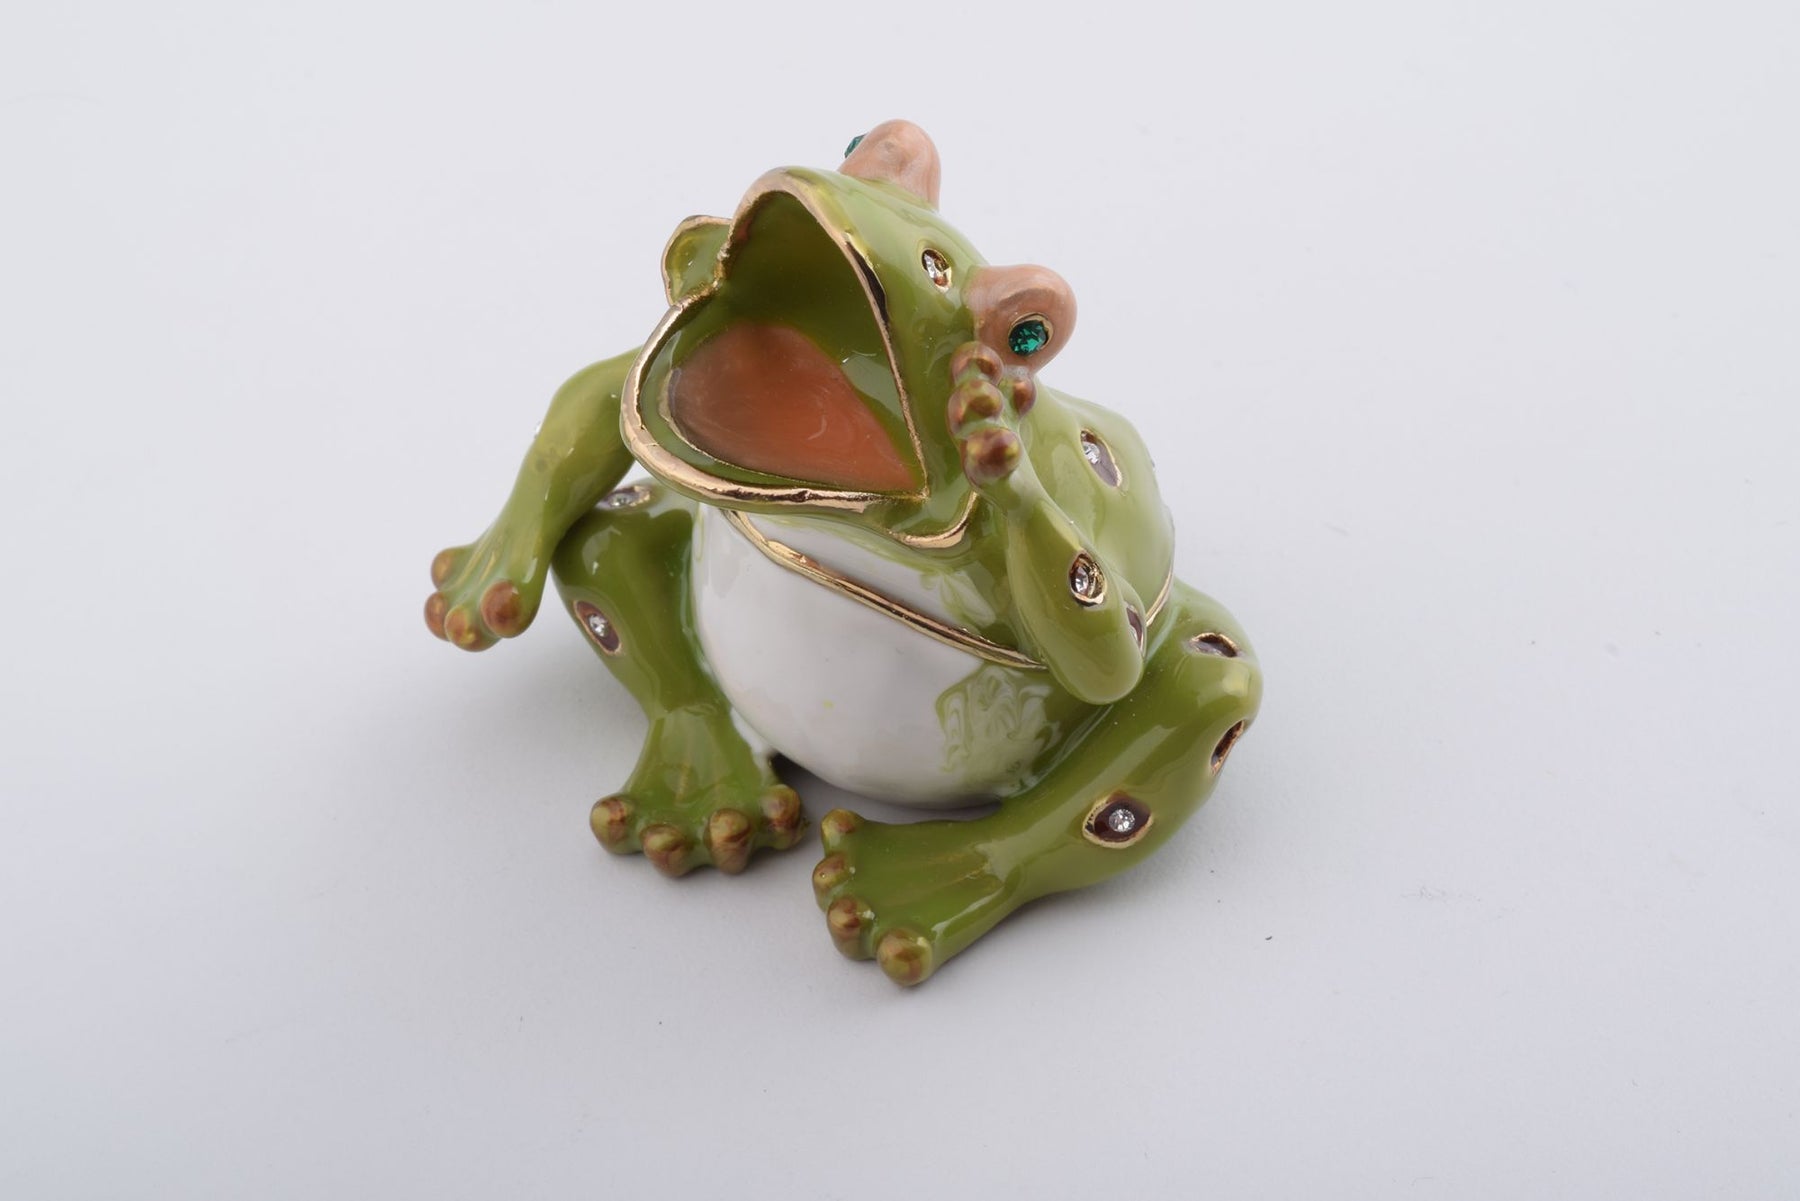 Grenouille assise qui crie